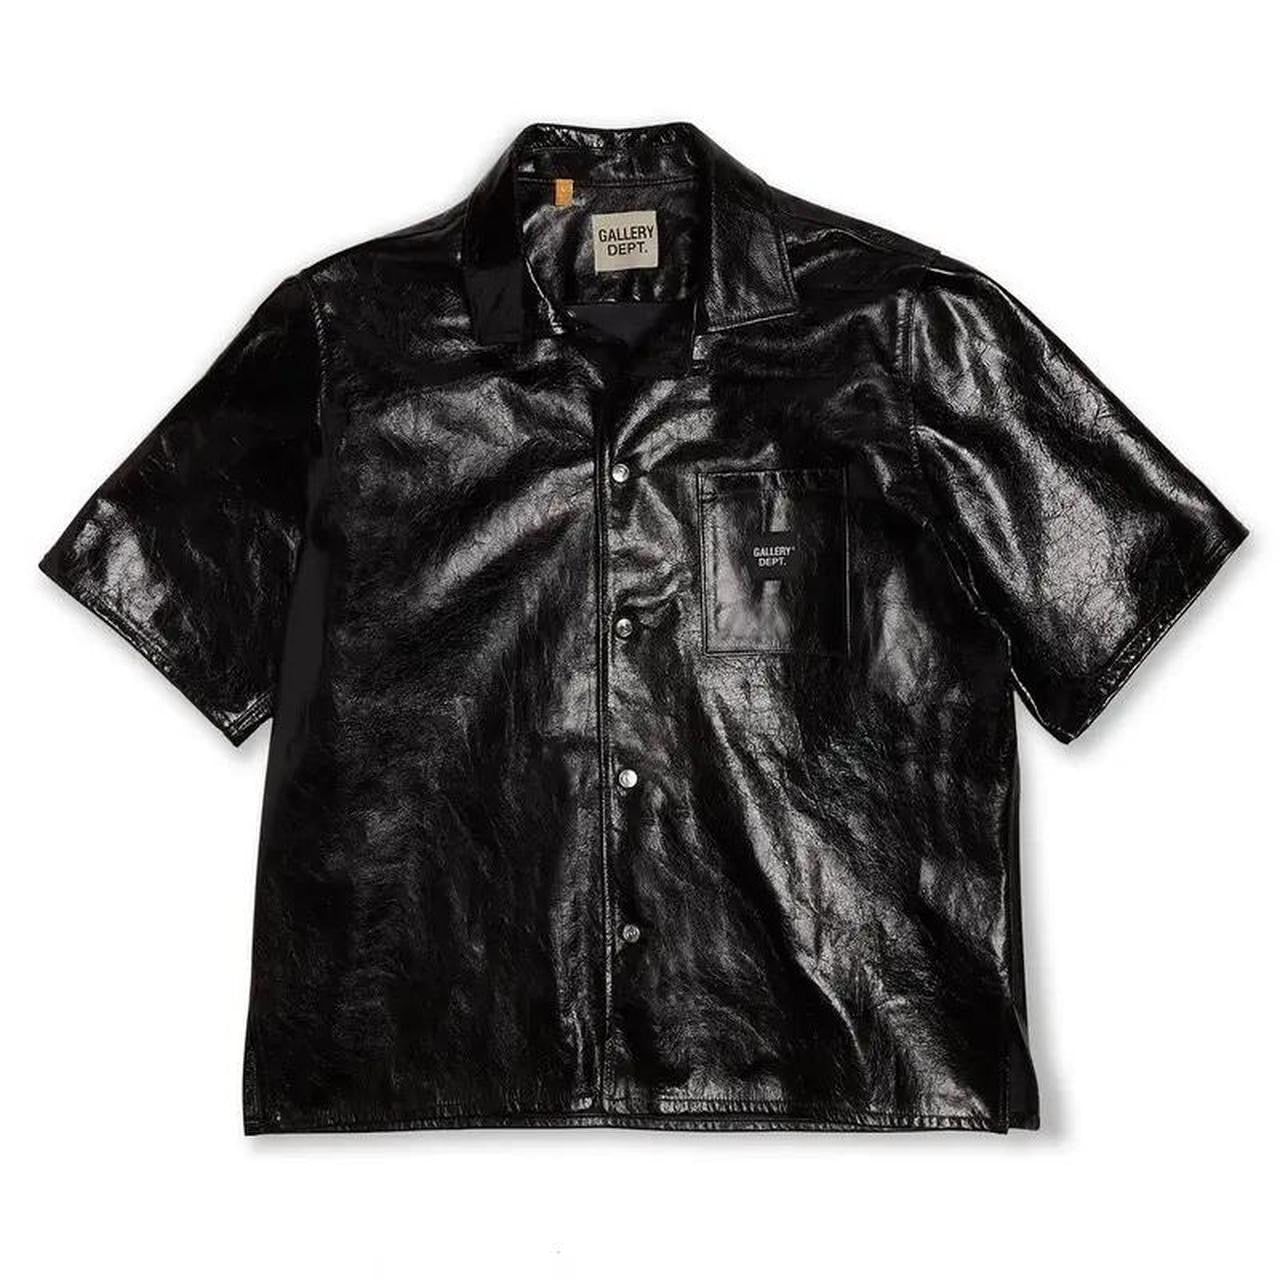 Gallery Dept. Leather Shirt